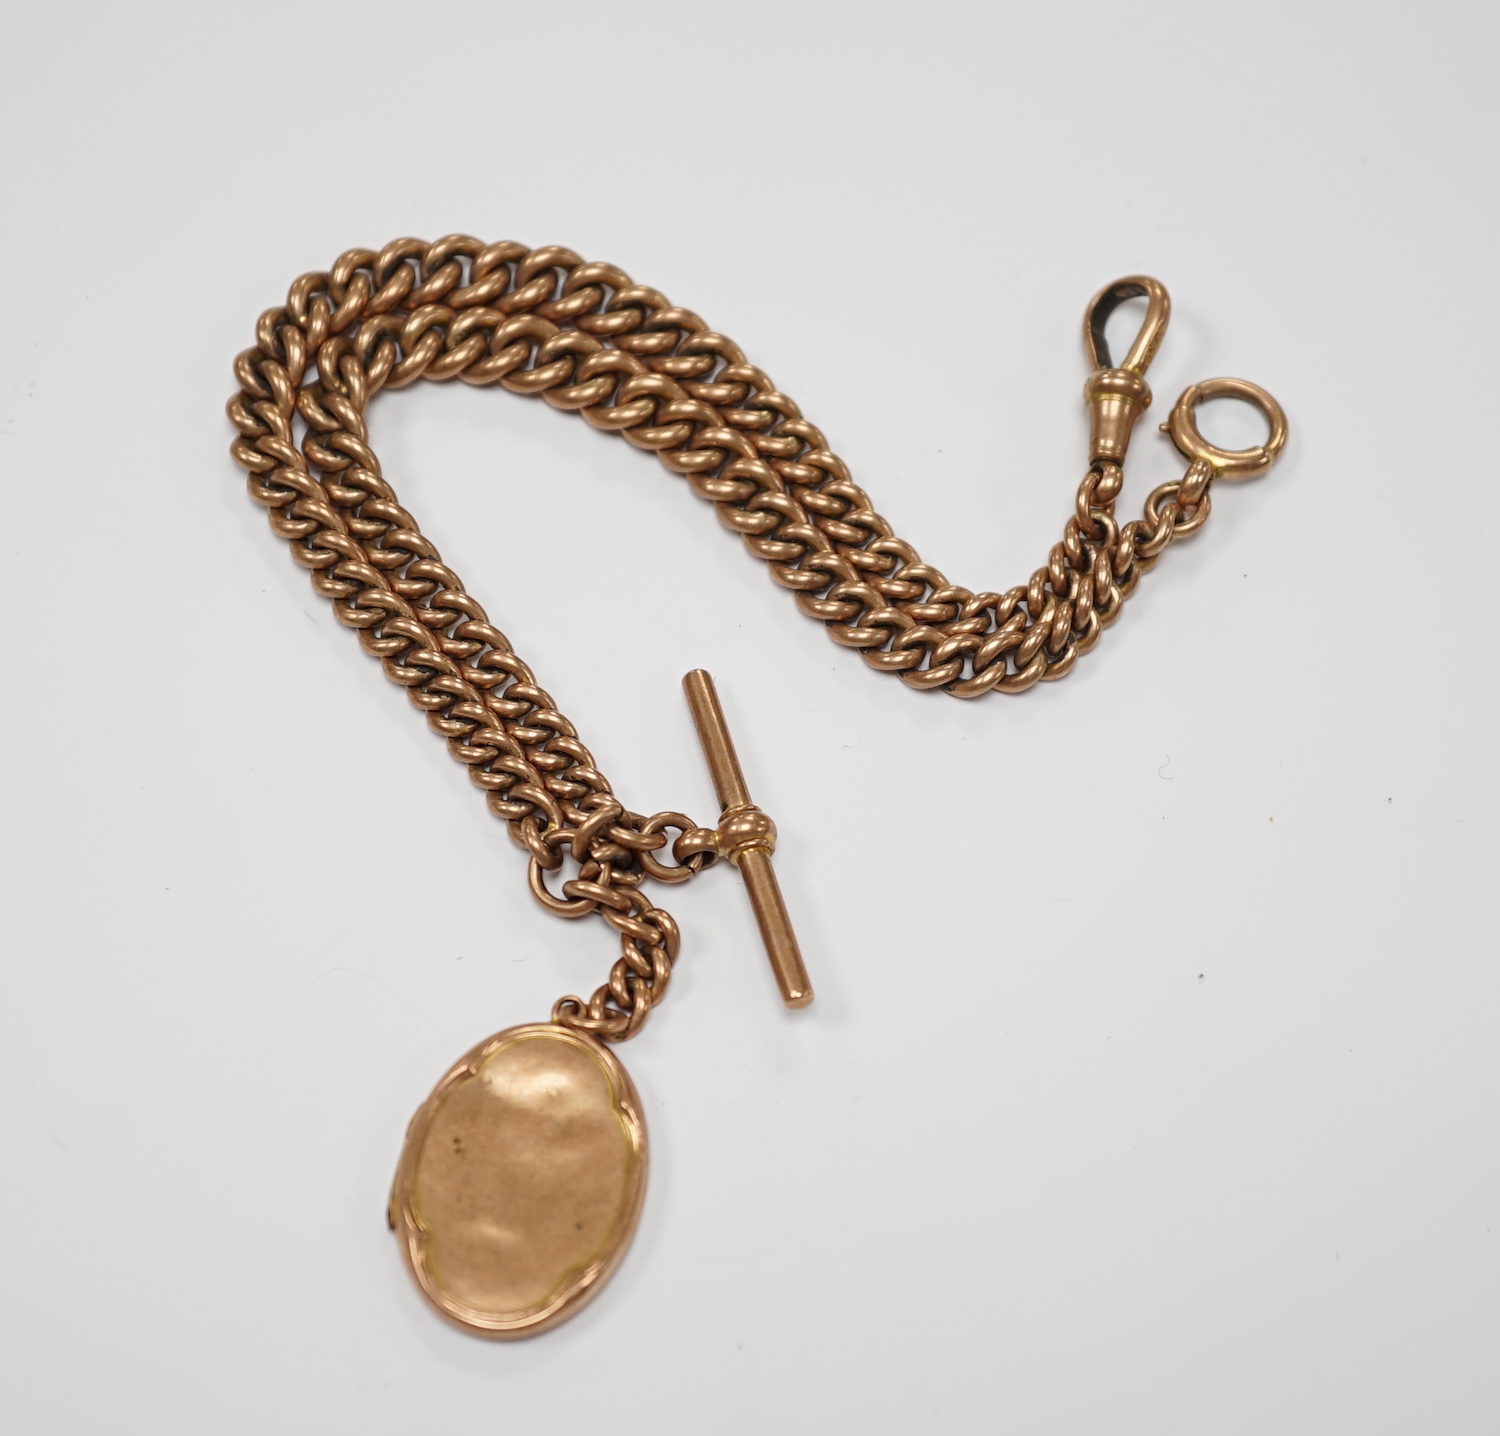 An Edwardian 9ct gold graduated curb link albert, 35cm, hung with a 9ct gold locket, gross 48.6 grams.